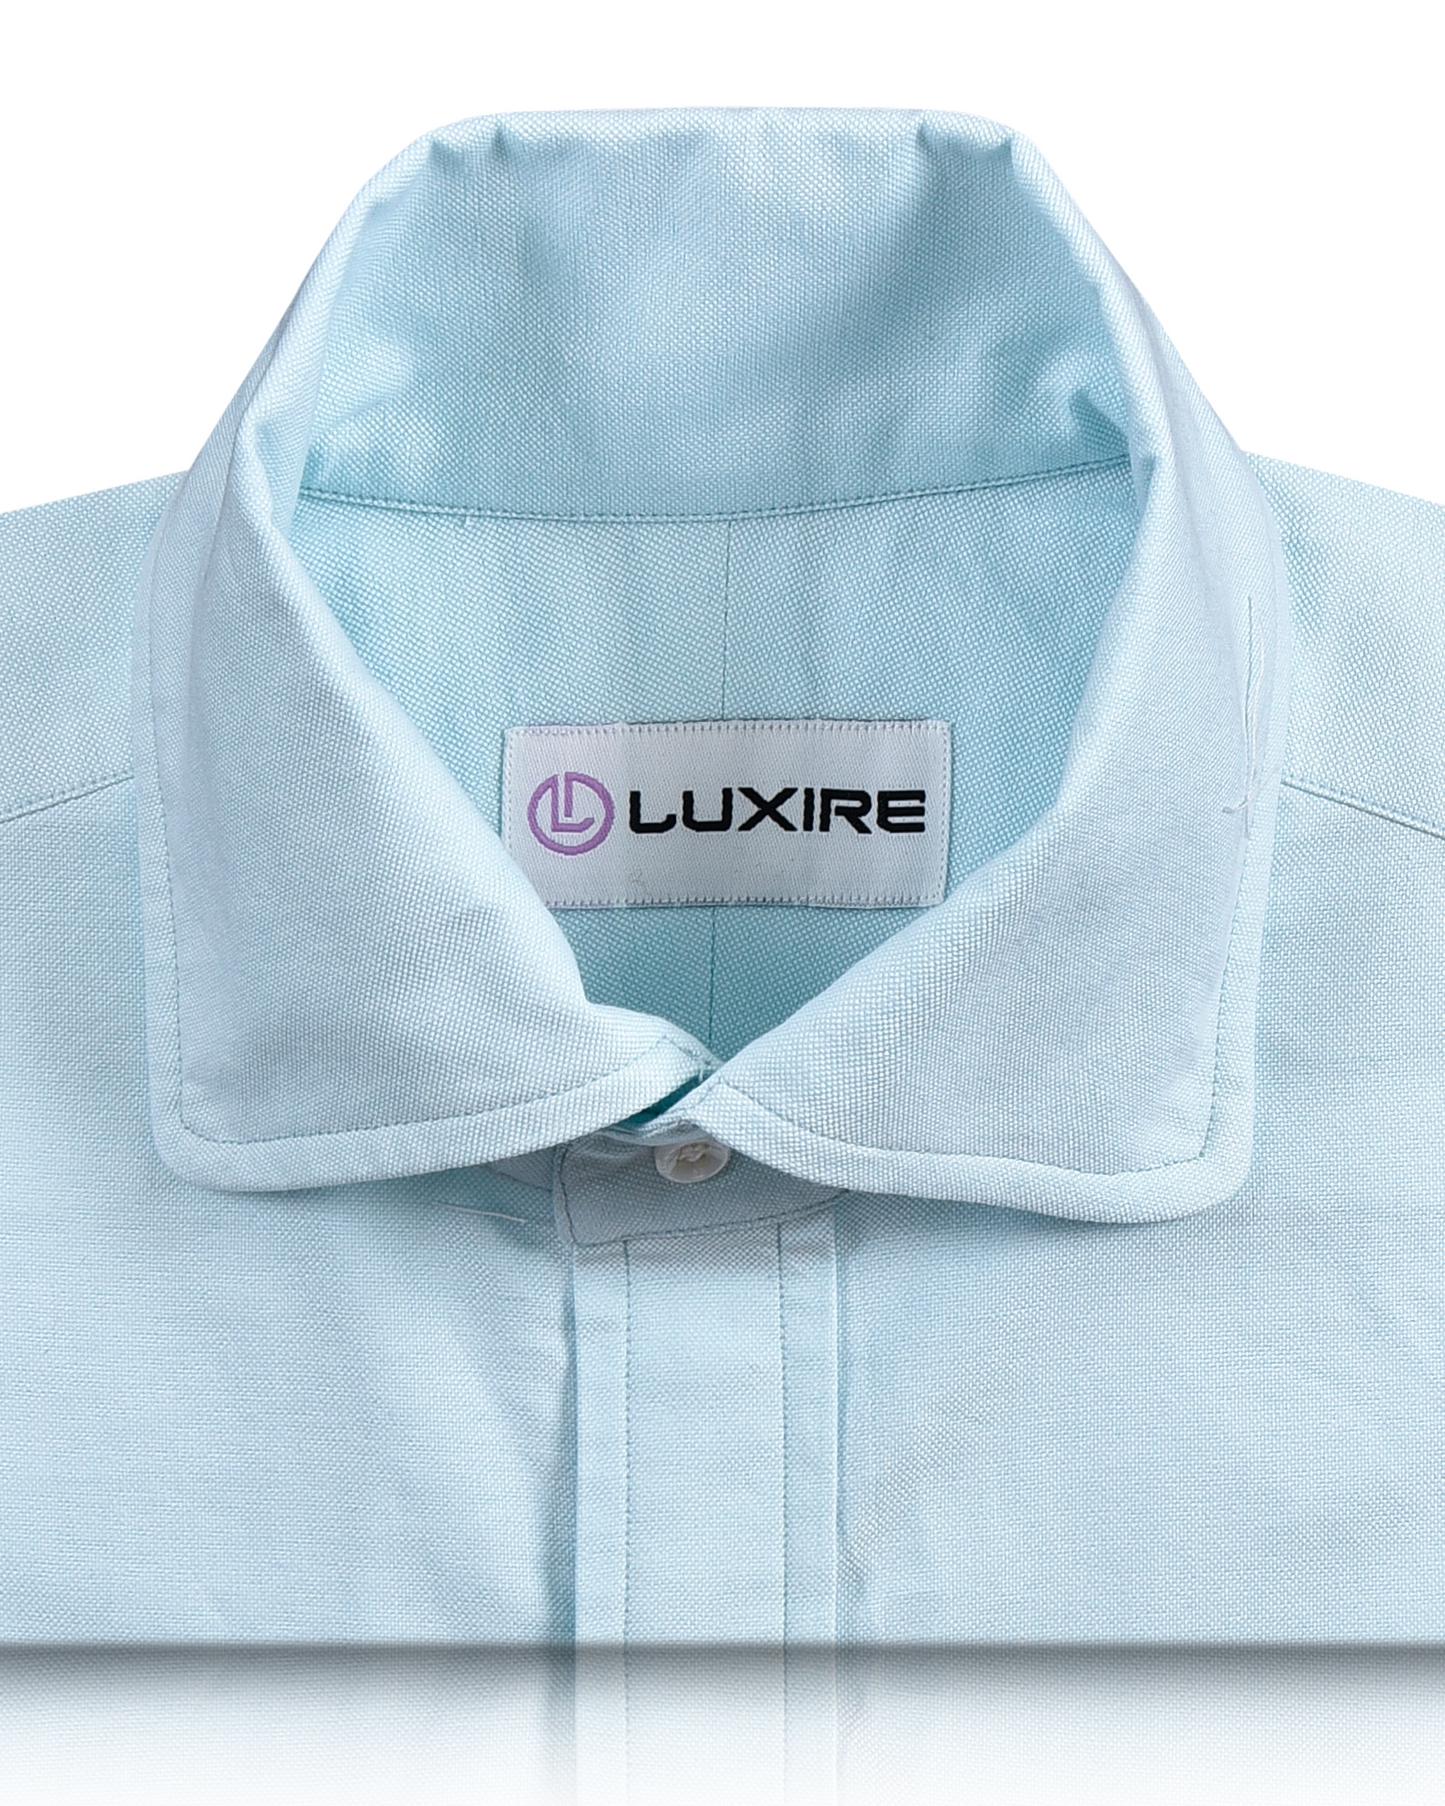 Collar of the custom oxford shirt for men by Luxire in pale blue